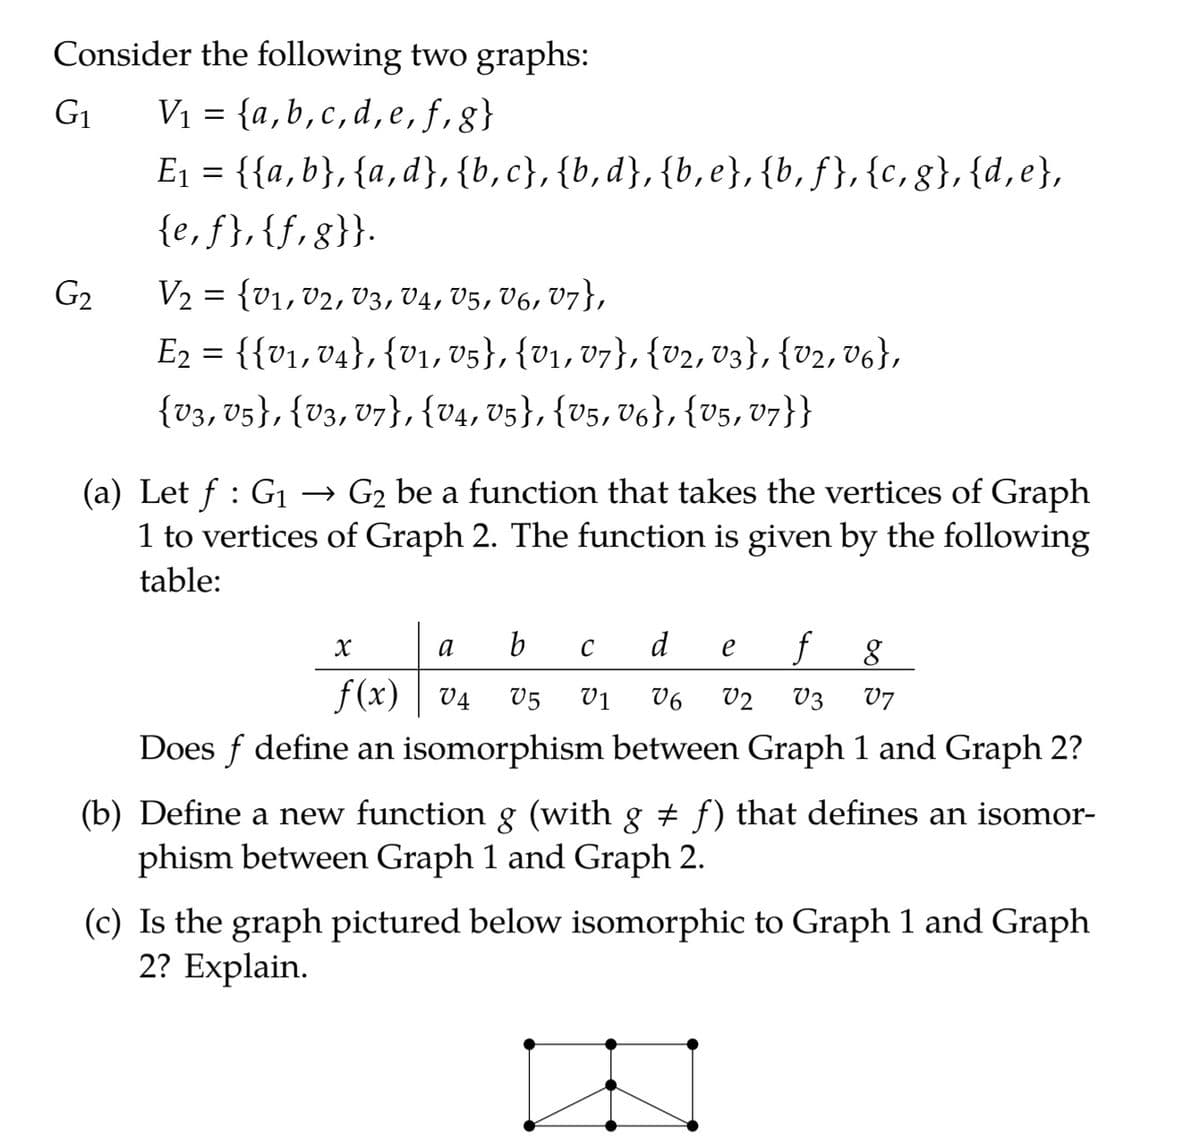 Consider the following two graphs:
V1 = {a,b,c,d,e, f,g}
E1 = {{a,b}, {a, d},{b,c}, {b,d}, {b,e},{b,f},{c,g},{d,e},
{e, f},{f,g}}.
G1
G2
V2 = {v1, V2, V3, V4, V5, V6, V7},
E2 = {{v1, v4}, {v1, v5}, {V1, v7}, {v2, V3}, {V2, V6},
{V3, V5}, {V3, V7},{v4, V5}, {U5, V6},{v5, 07}}
→ G2 be a function that takes the vertices of Graph
(a) Let f : G1
1 to vertices of Graph 2. The function is given by the following
table:
b
d
e
f
a
C
f(x) | v4
V5
V1
V6
V2
V3
V7
Does f define an isomorphism between Graph 1 and Graph 2?
(b) Define a new function g (with g ± f) that defines an isomor-
phism between Graph 1 and Graph 2.
(c) Is the graph pictured below isomorphic to Graph 1 and Graph
2? Explain.
